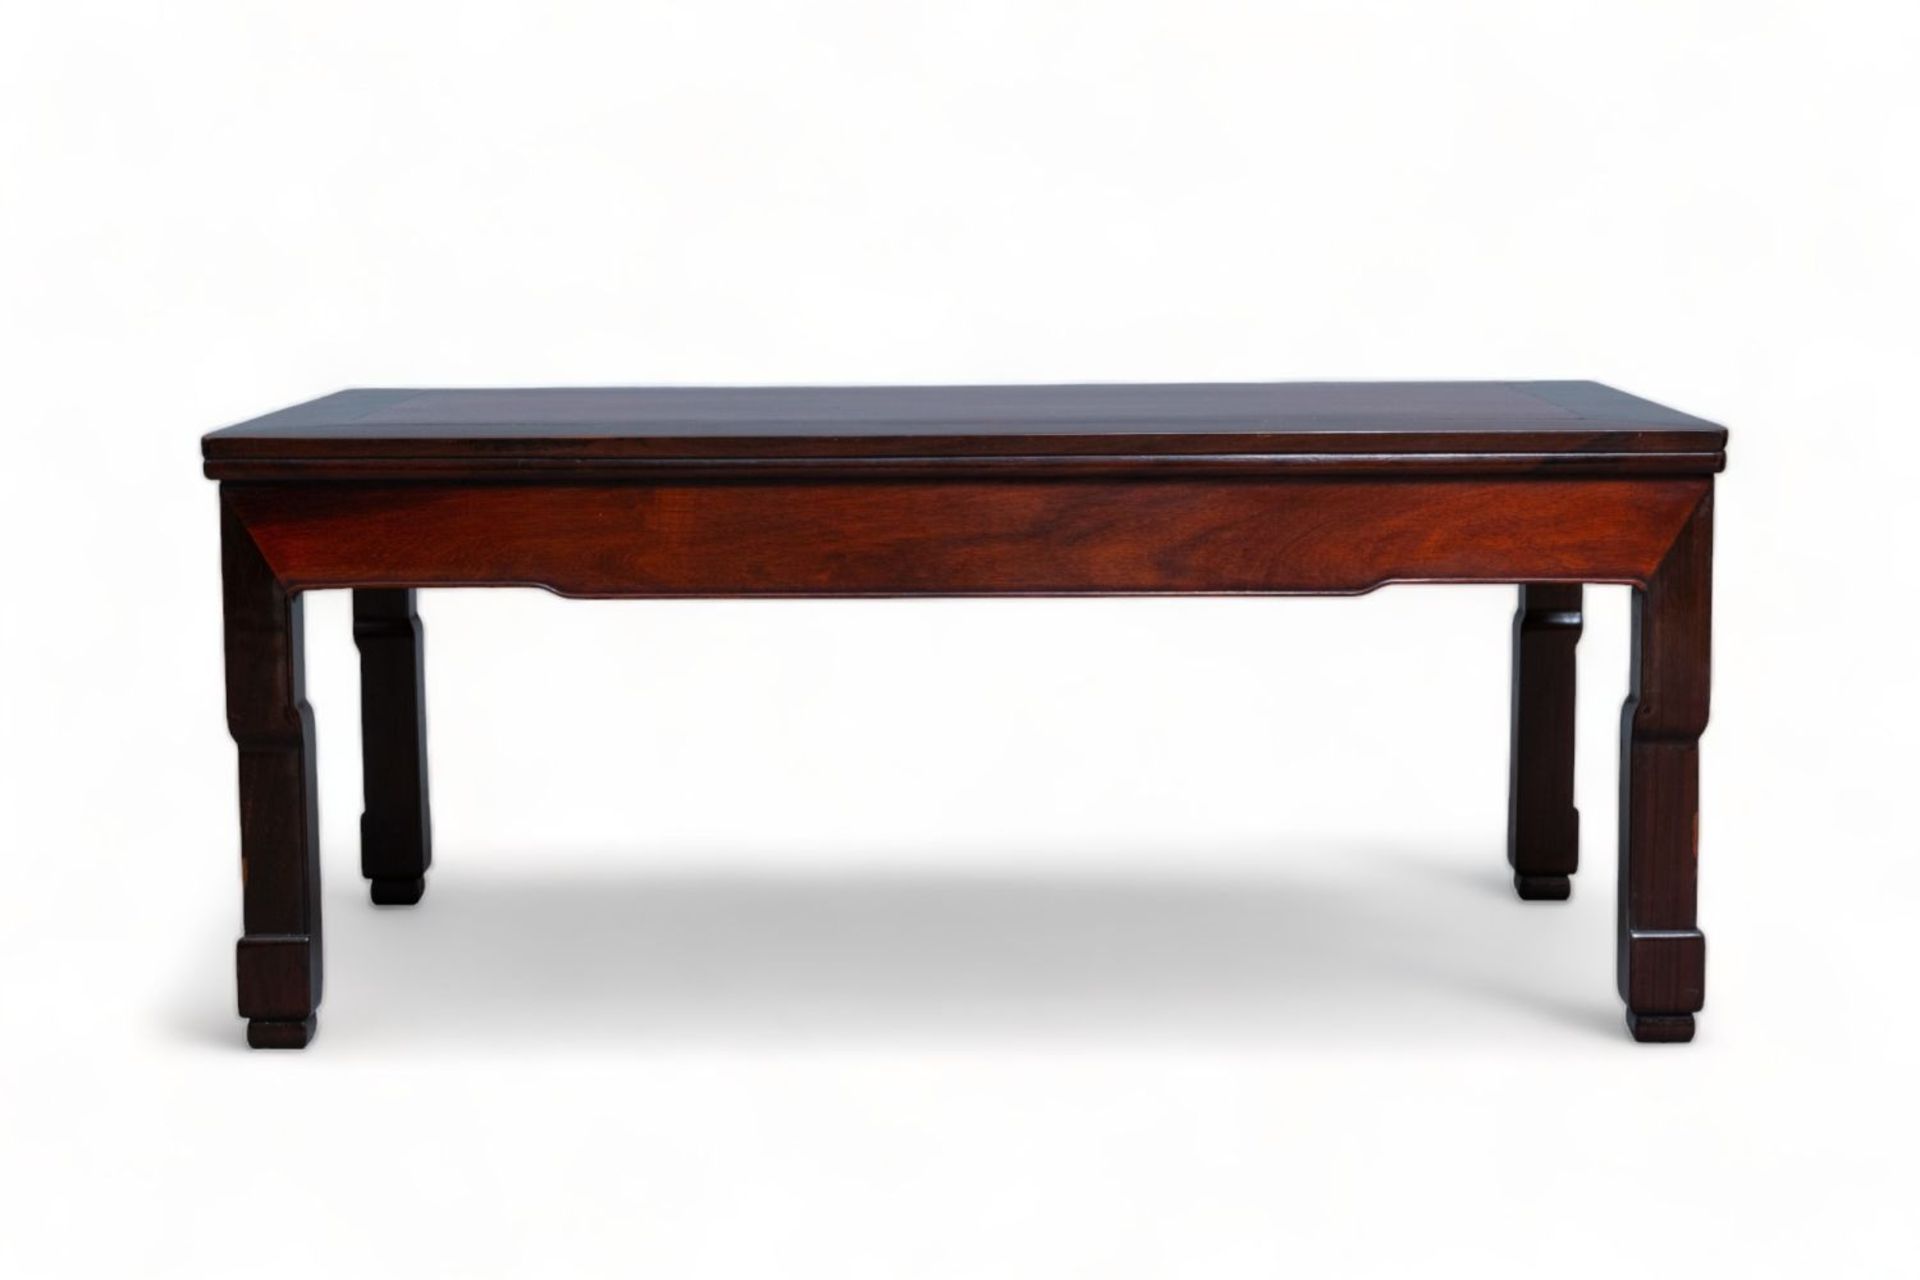 A Chinese rectangular wooden 'kang' table, 19th Century